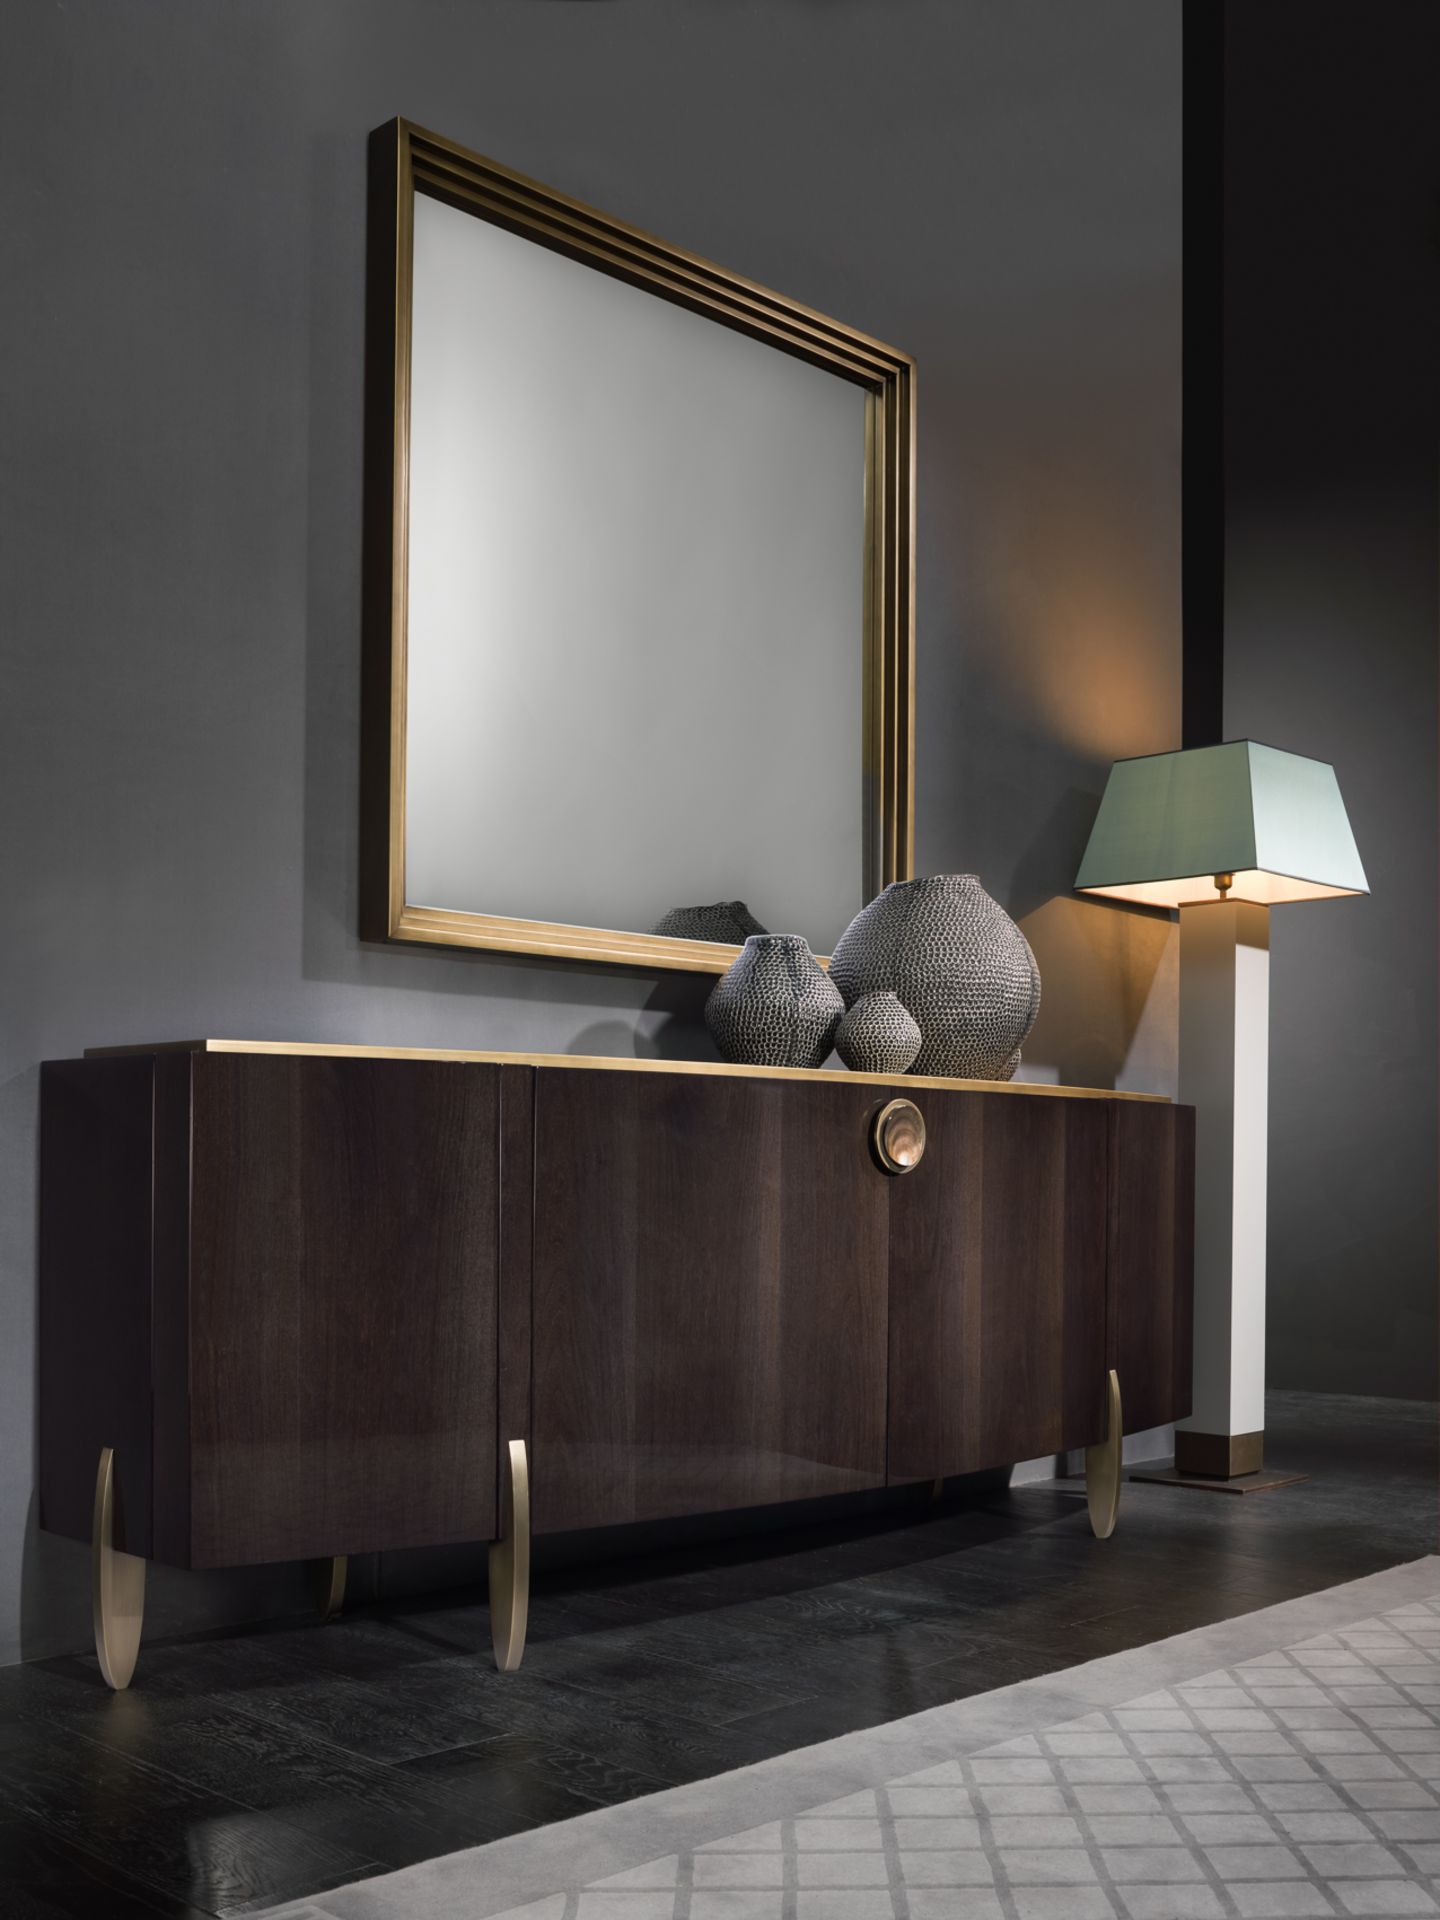 Fashion Affair Large Sideboard by Telemaco for Malerba The Buffet, for the living room, is shaped by